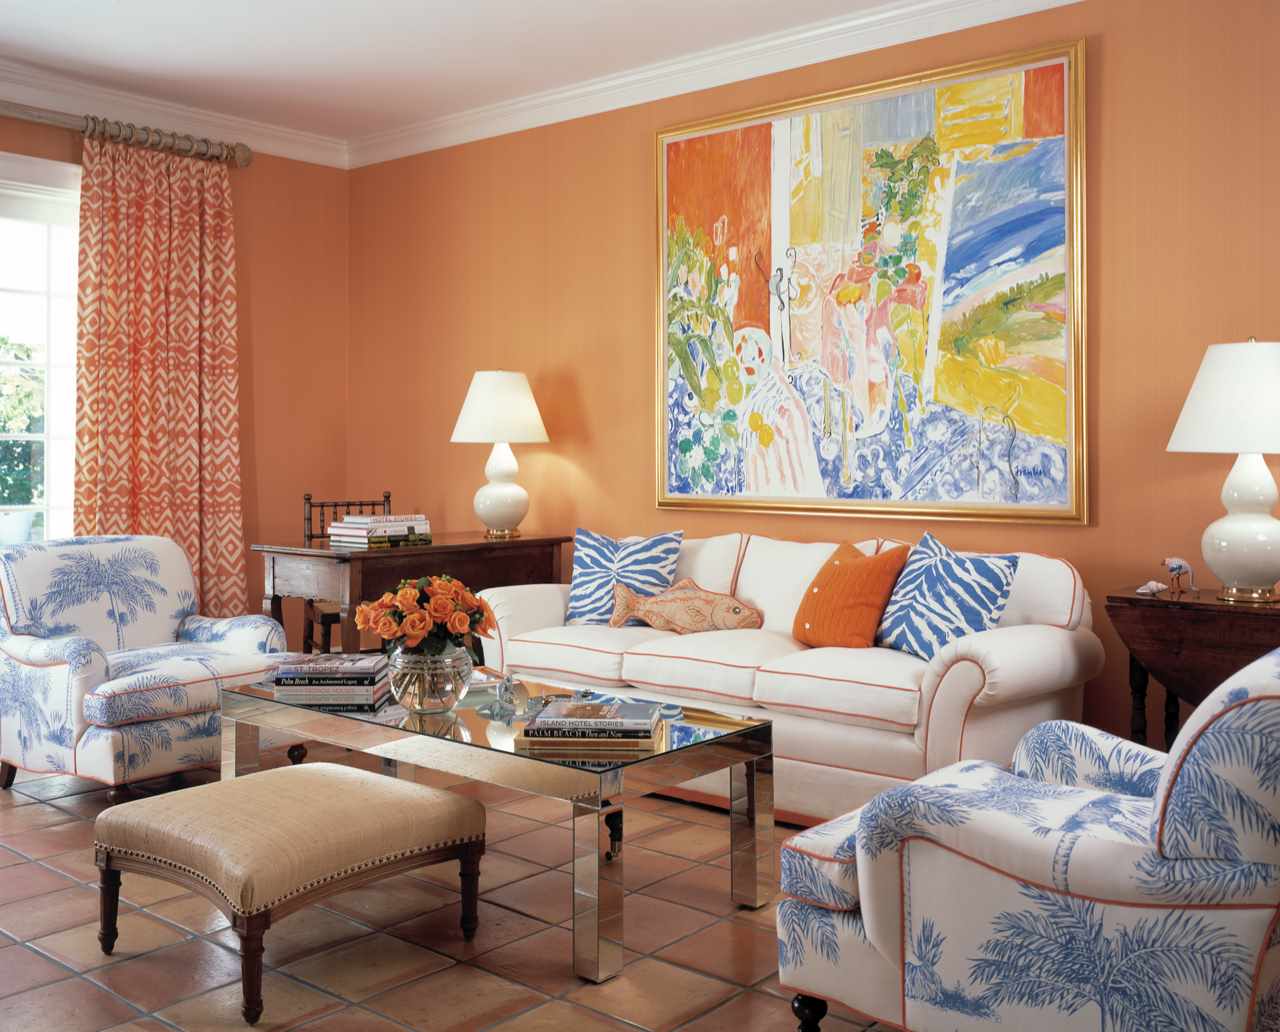 An example of a combination of bright peach color in the design of an apartment